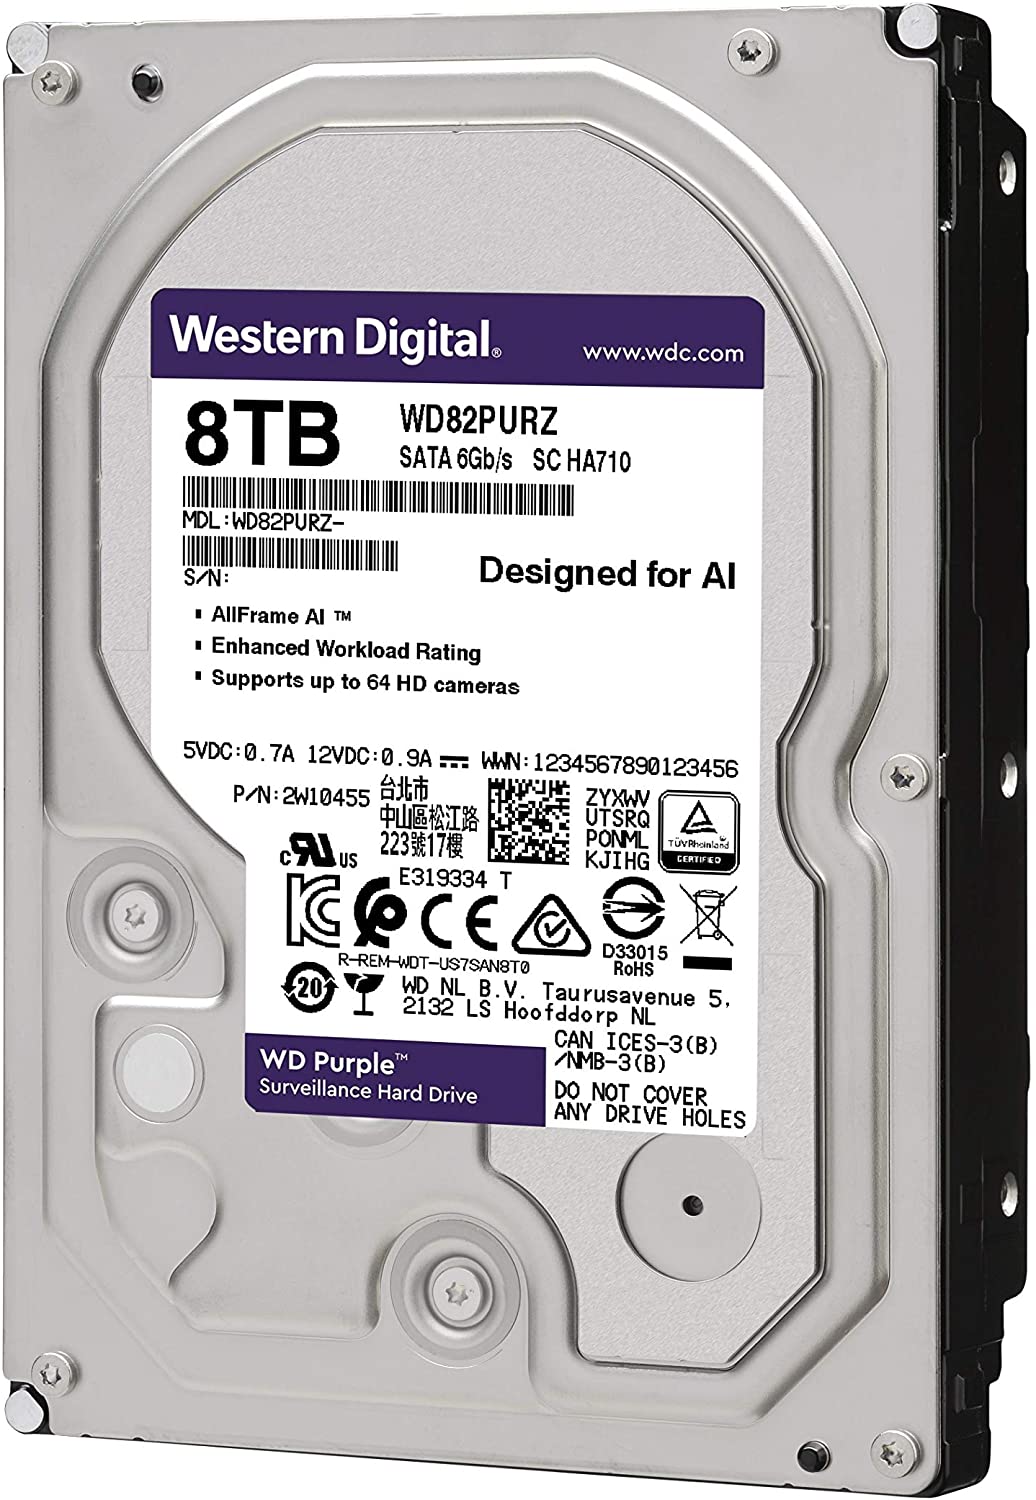 HDD 8To Purple  Domotec Services